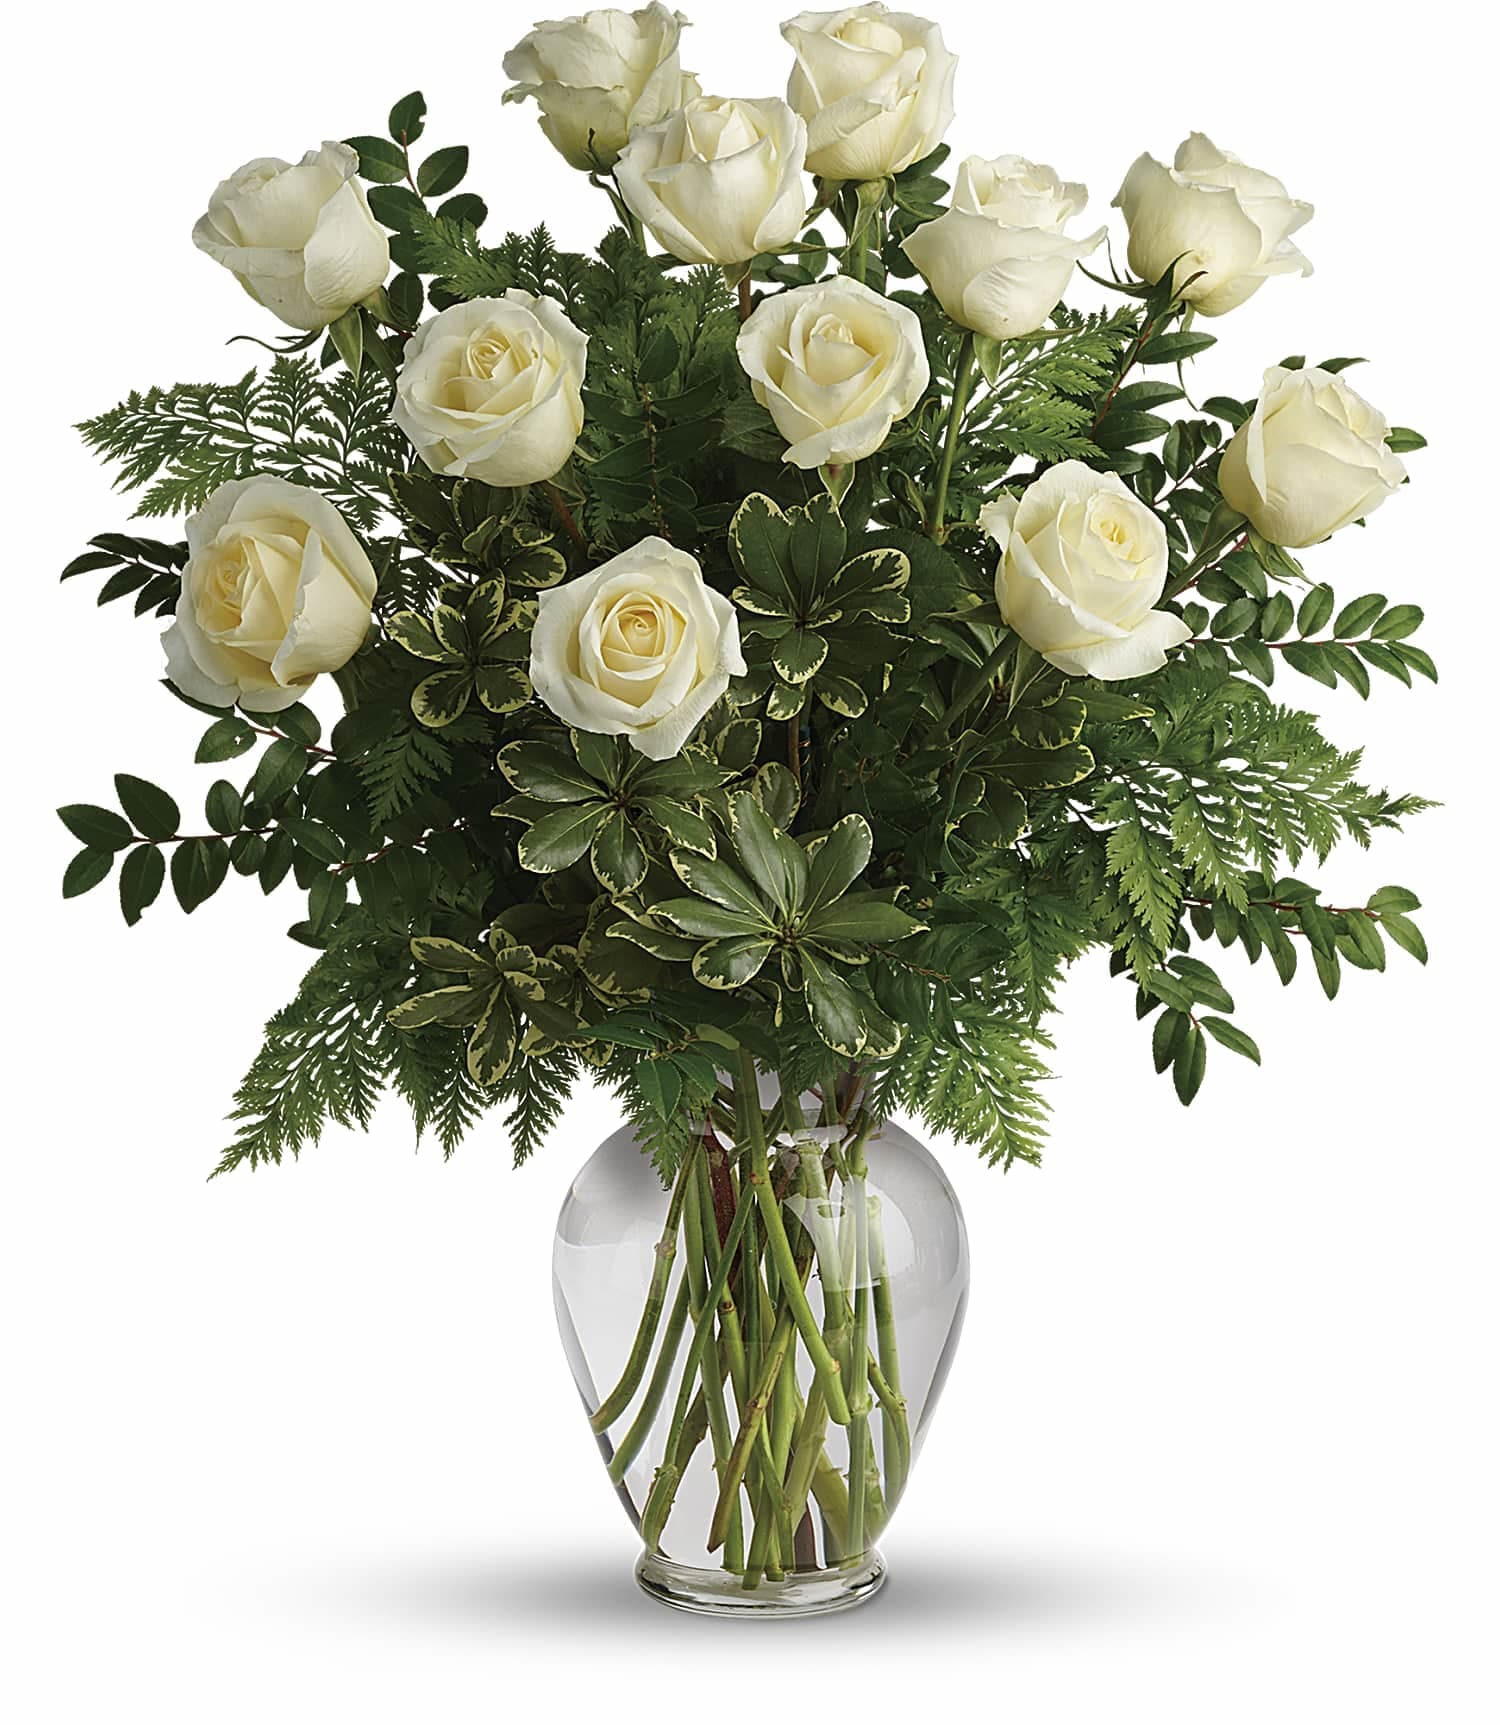 Joy Of Roses BouquetJoy Of Roses Bouquet - A joyful gesture of love and affection, this chic arrangement of one dozen pure white roses with fresh greens is a special surprise on any occasion. 